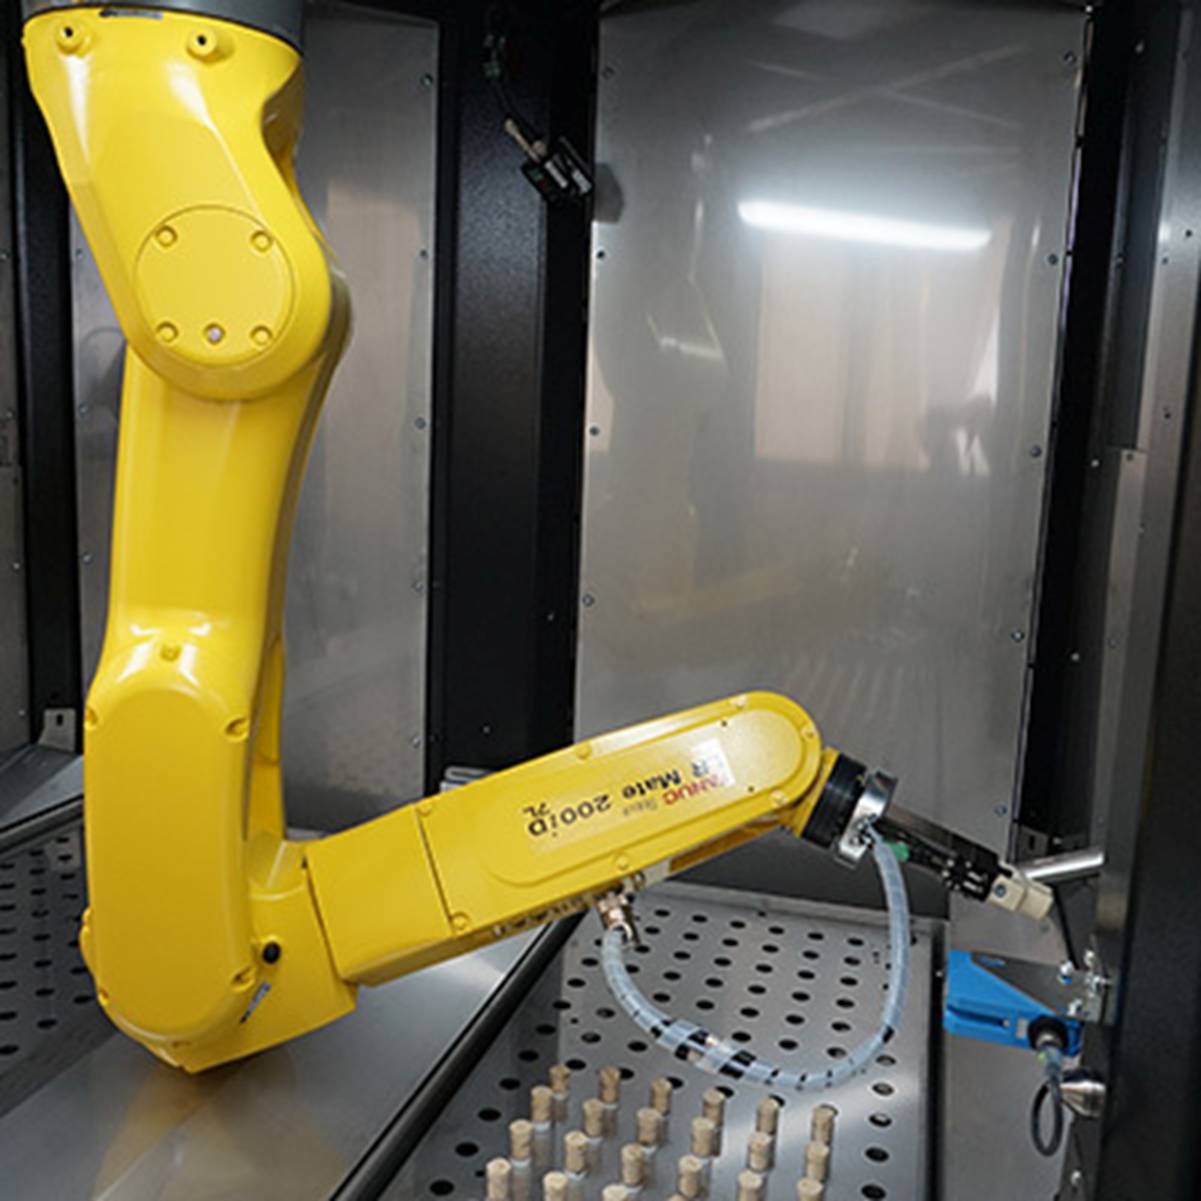 Immagine > Didascalia: < robot hands out test kit to the outside > == Cfr. «Tamponi senza contatto con i robot FANUC» [Rif.: OmnicomPublicRelationsGroup Italy - omnicomprgroup.com | Giugno 2020]